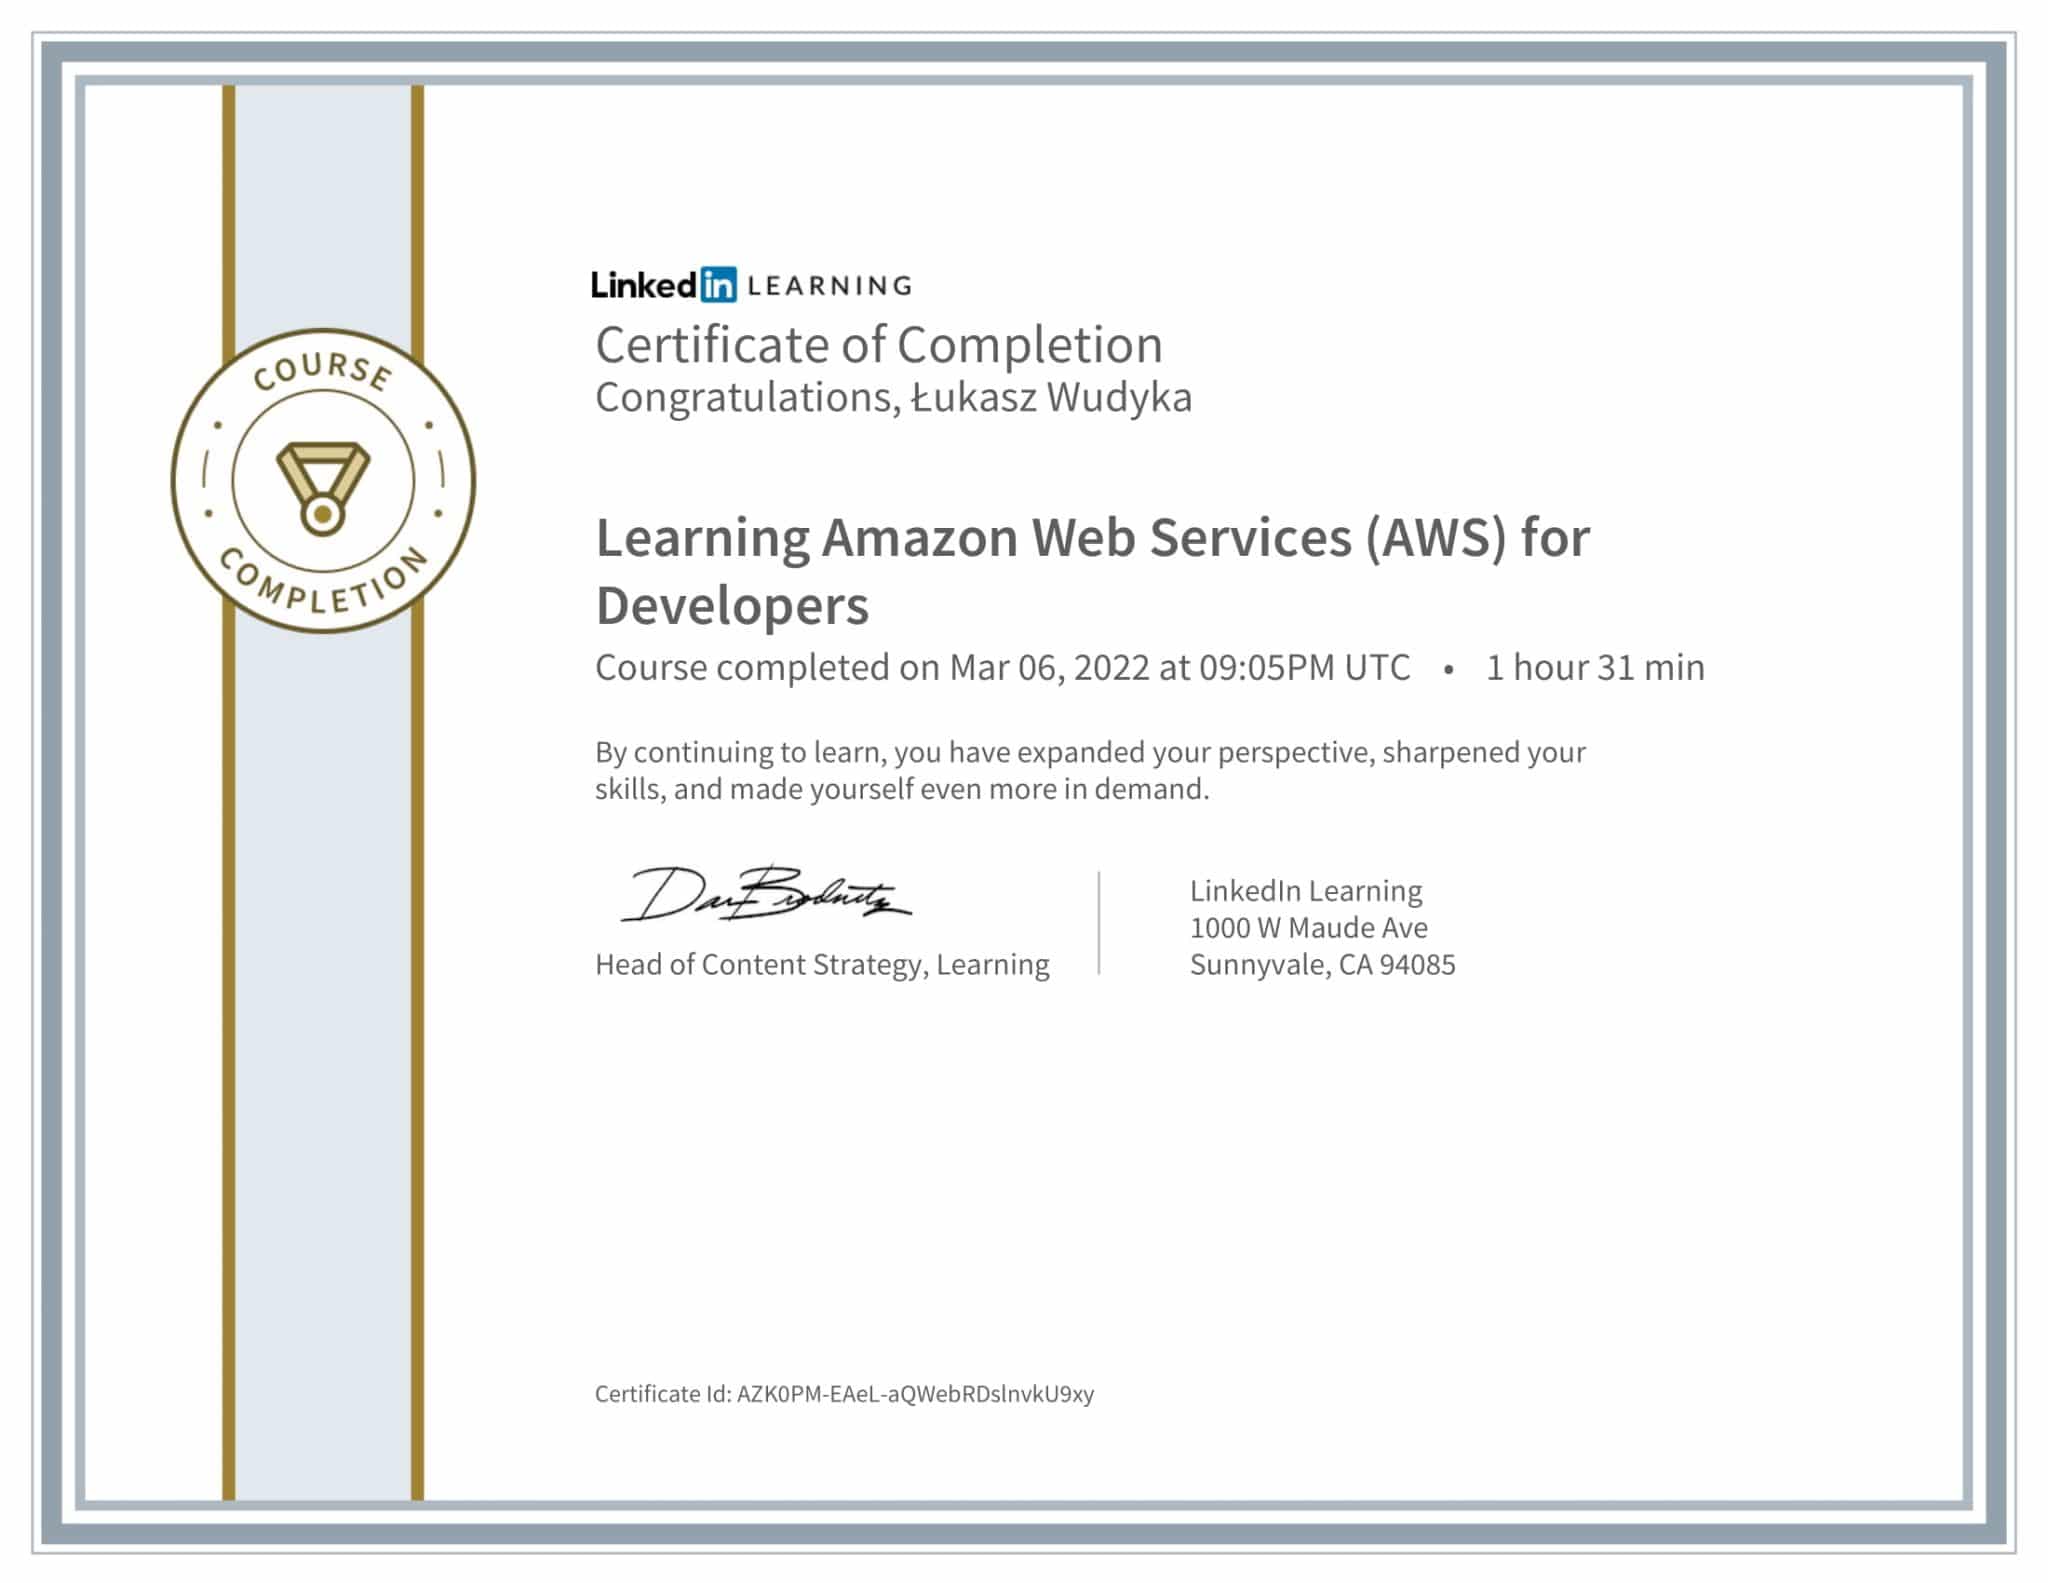 CertificateOfCompletion_Learning Amazon Web Services AWS for Developers-1